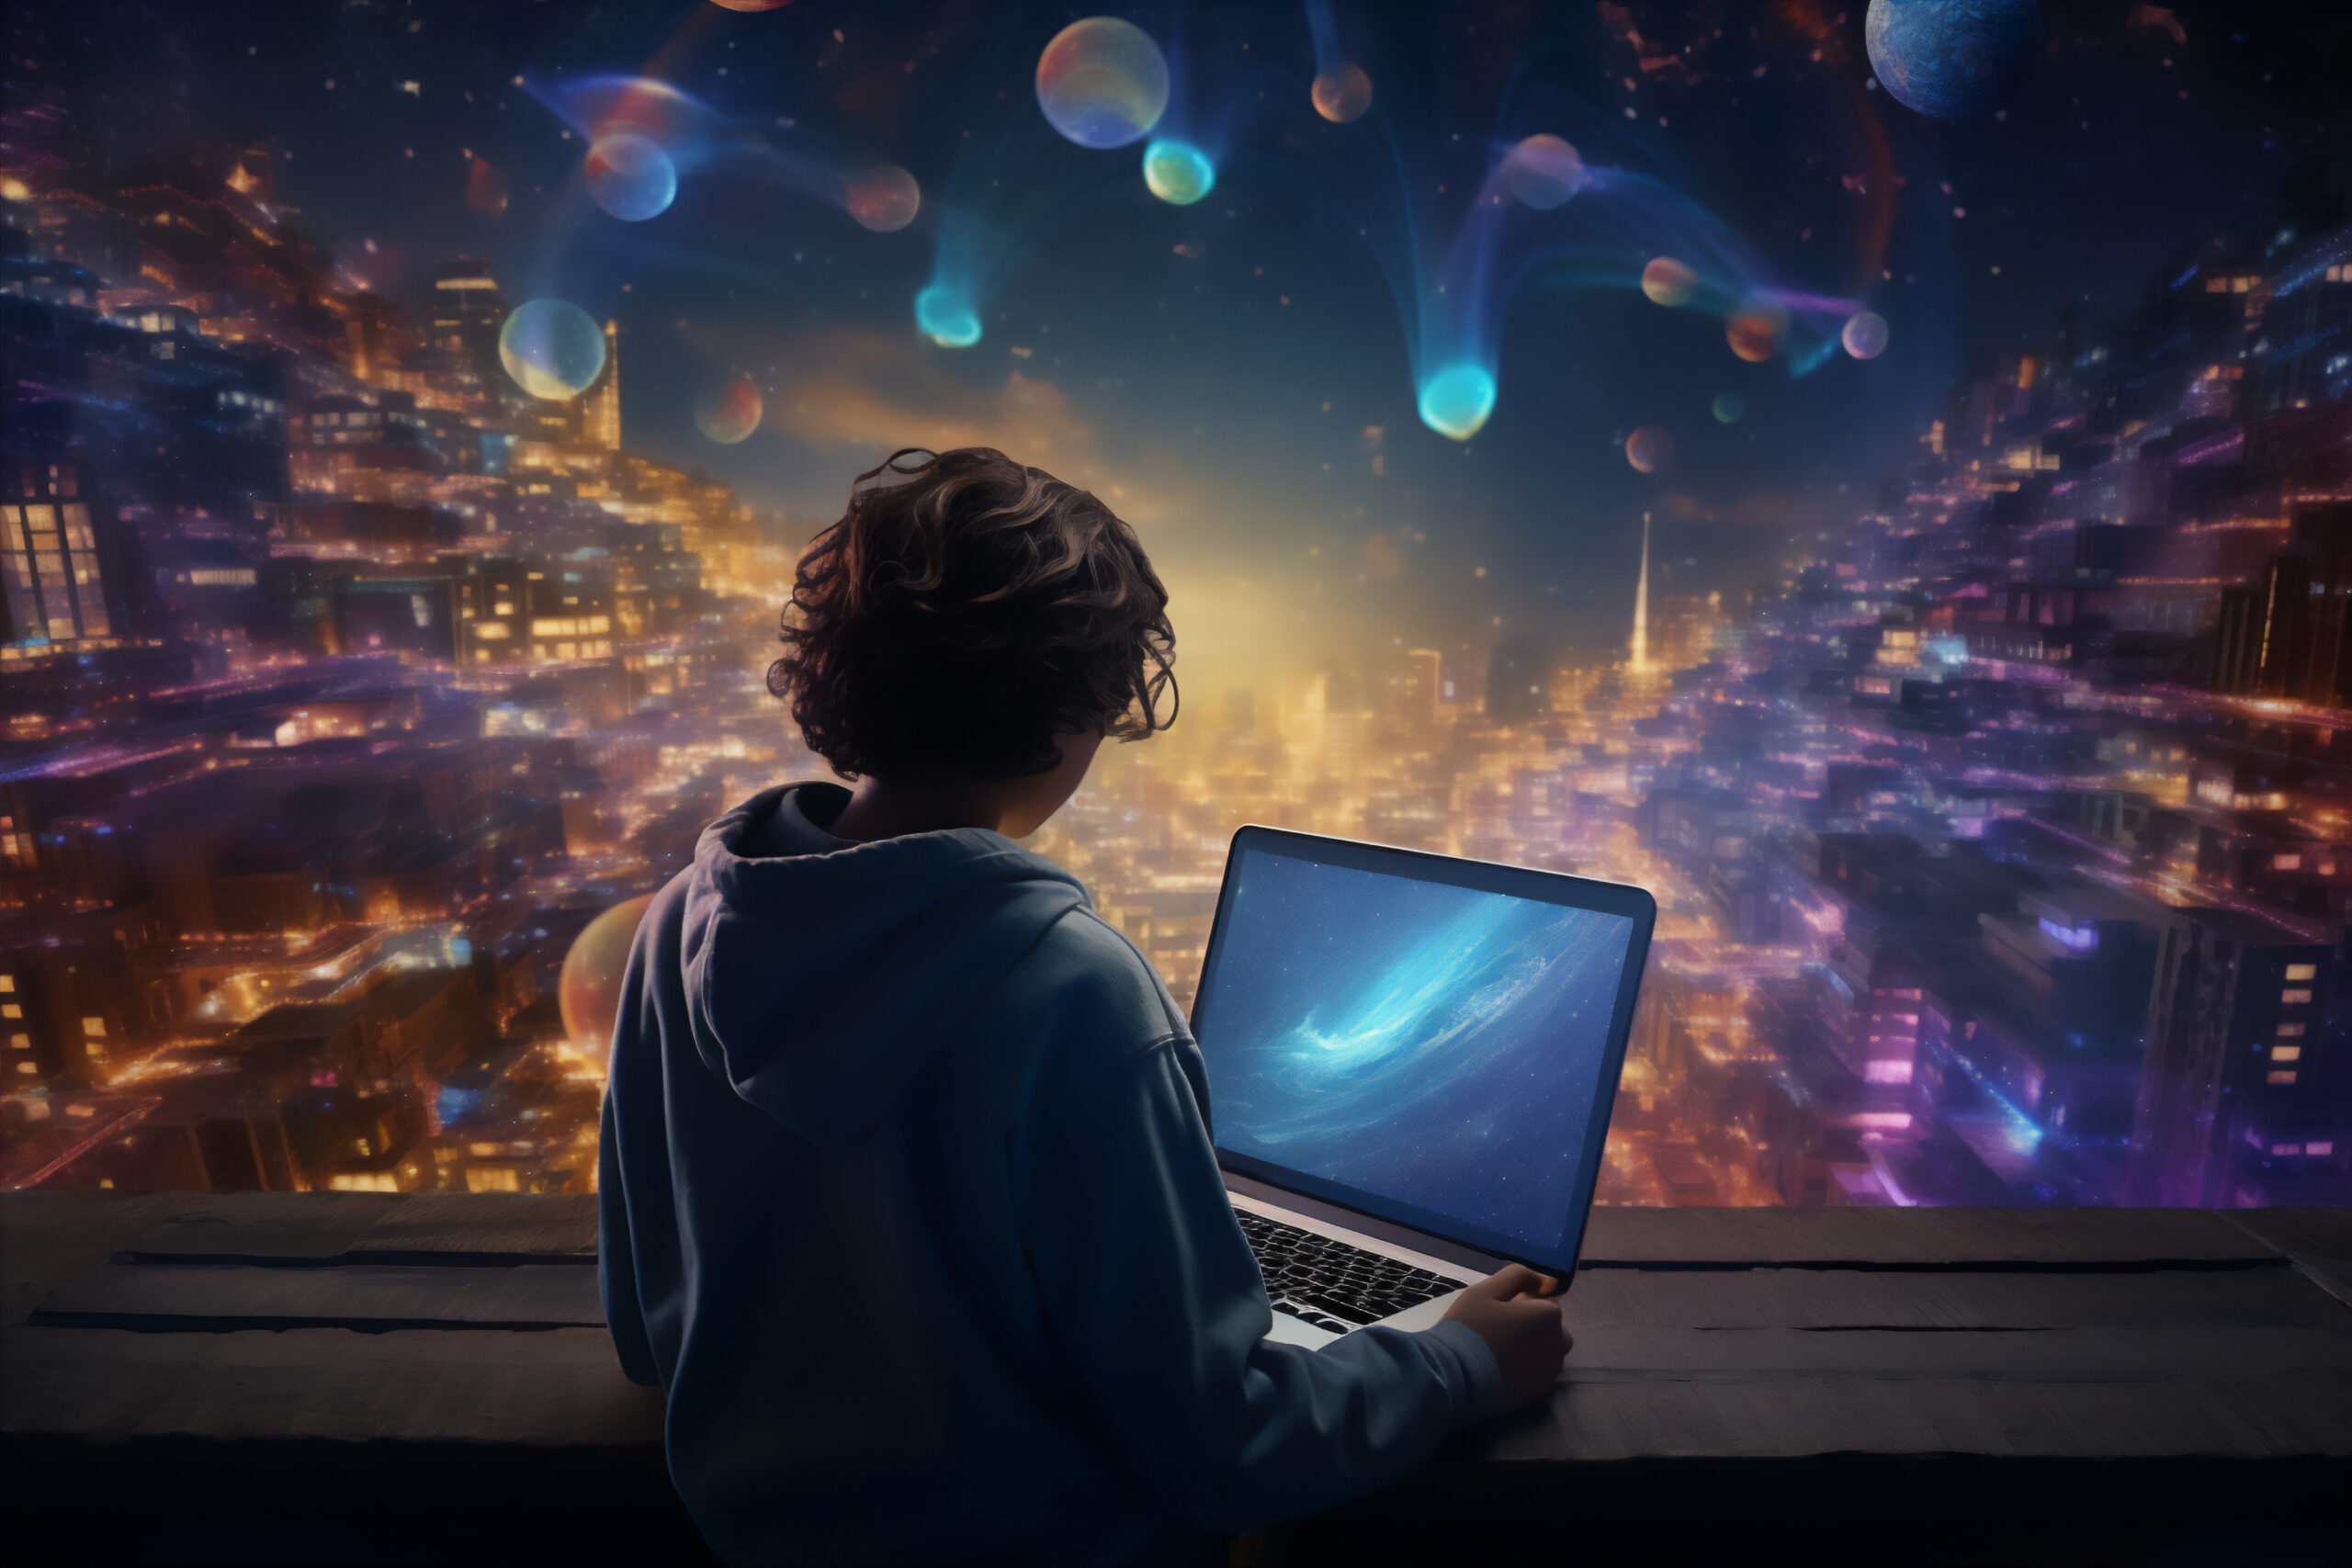 Child looking at a laptop screen with a futuristic cityscape background, highlighting the digital world